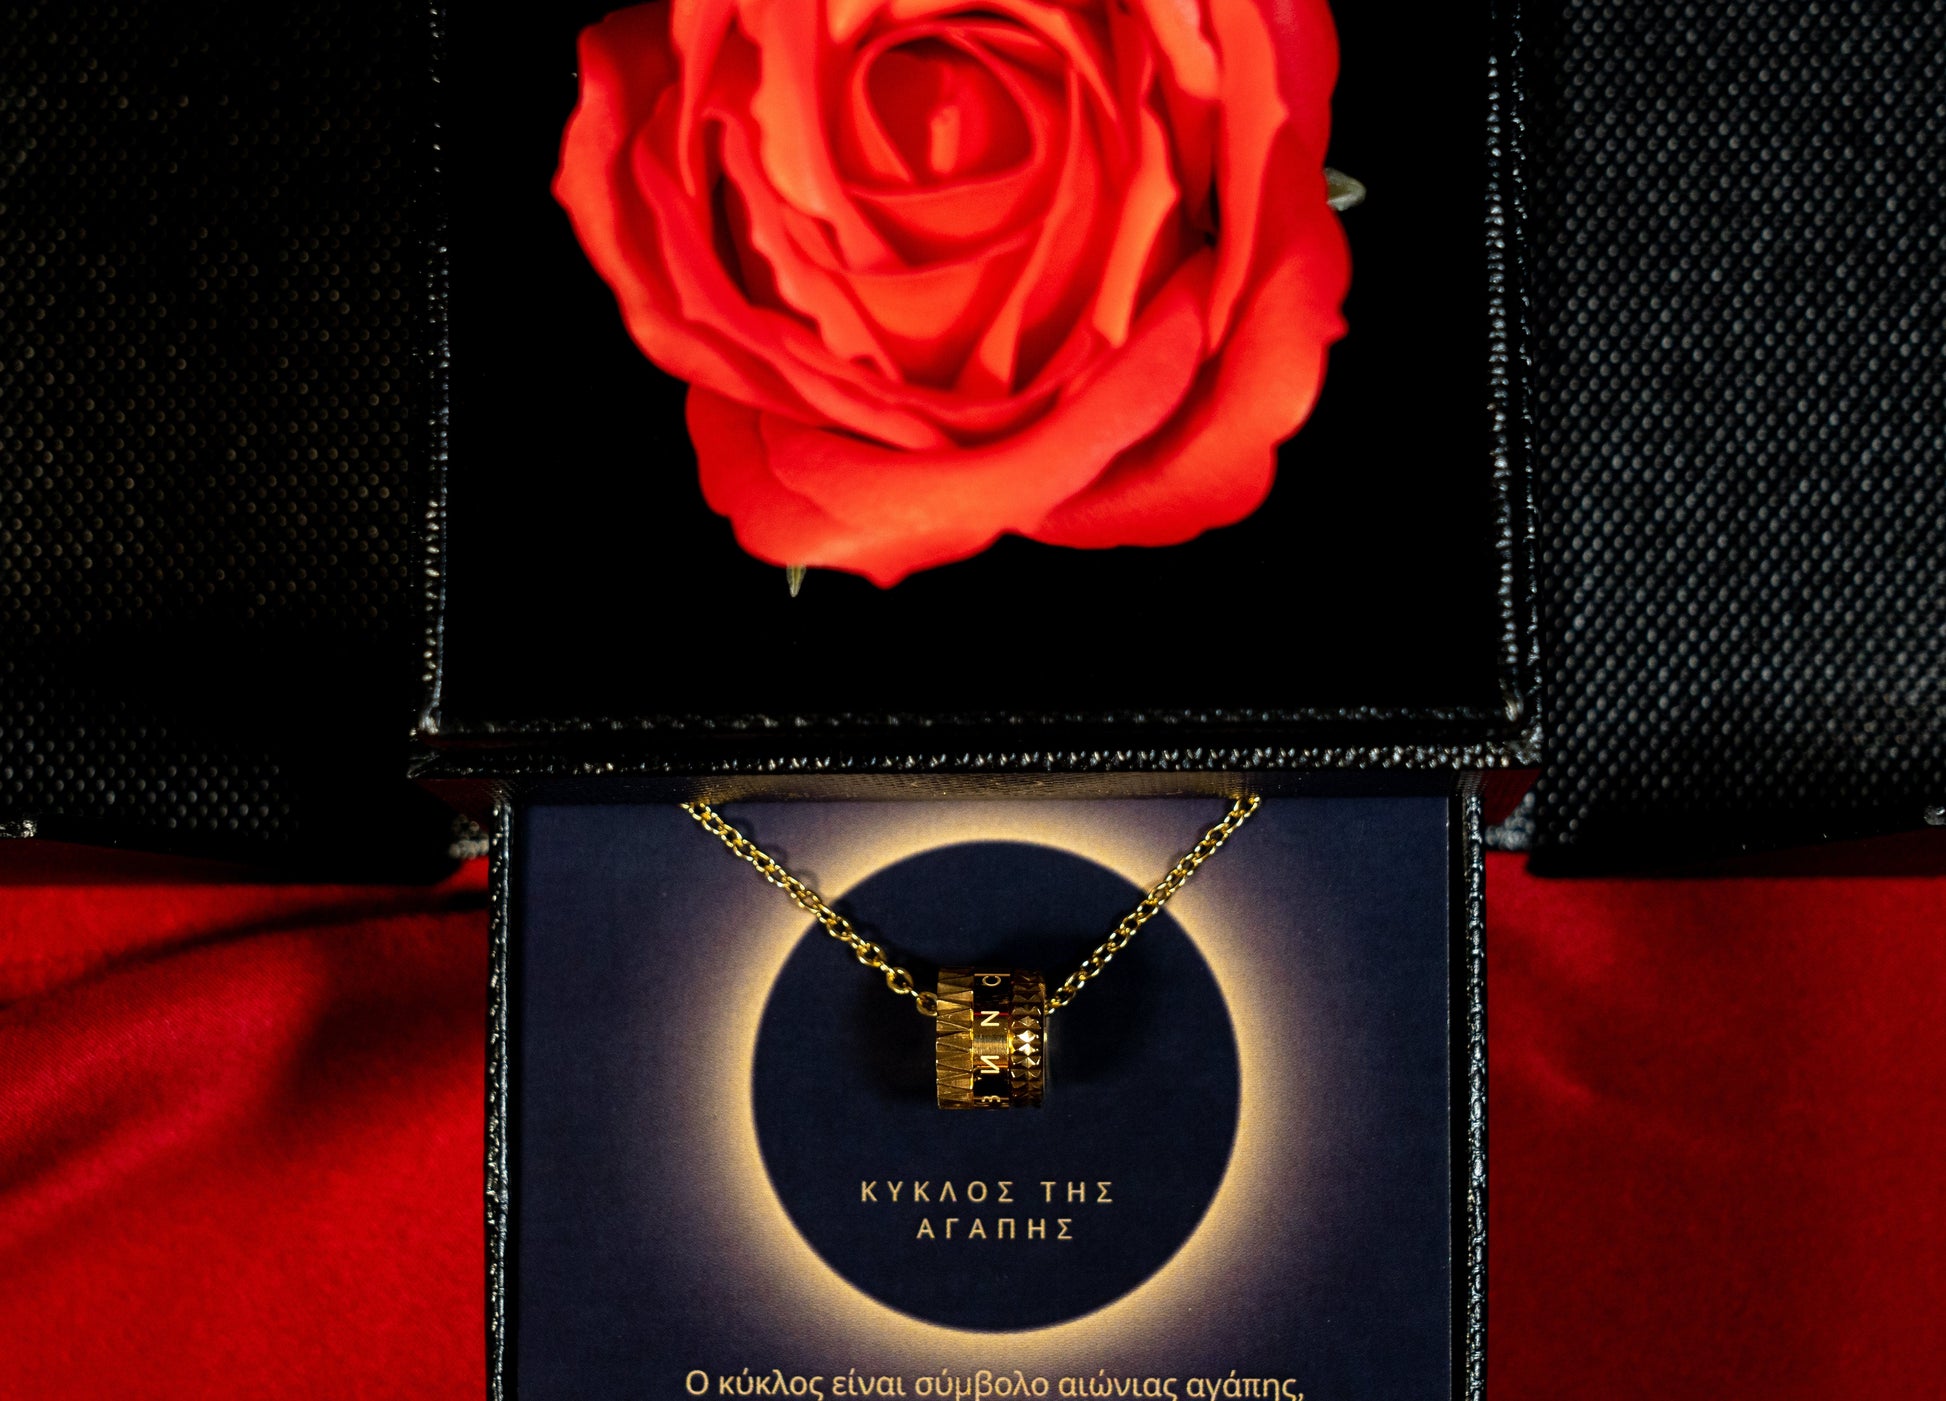 bianco rosso Rose Box Gold Valentine's Gift Box - Circle Of Love cyprus greece jewelry gift free shipping europe worldwide